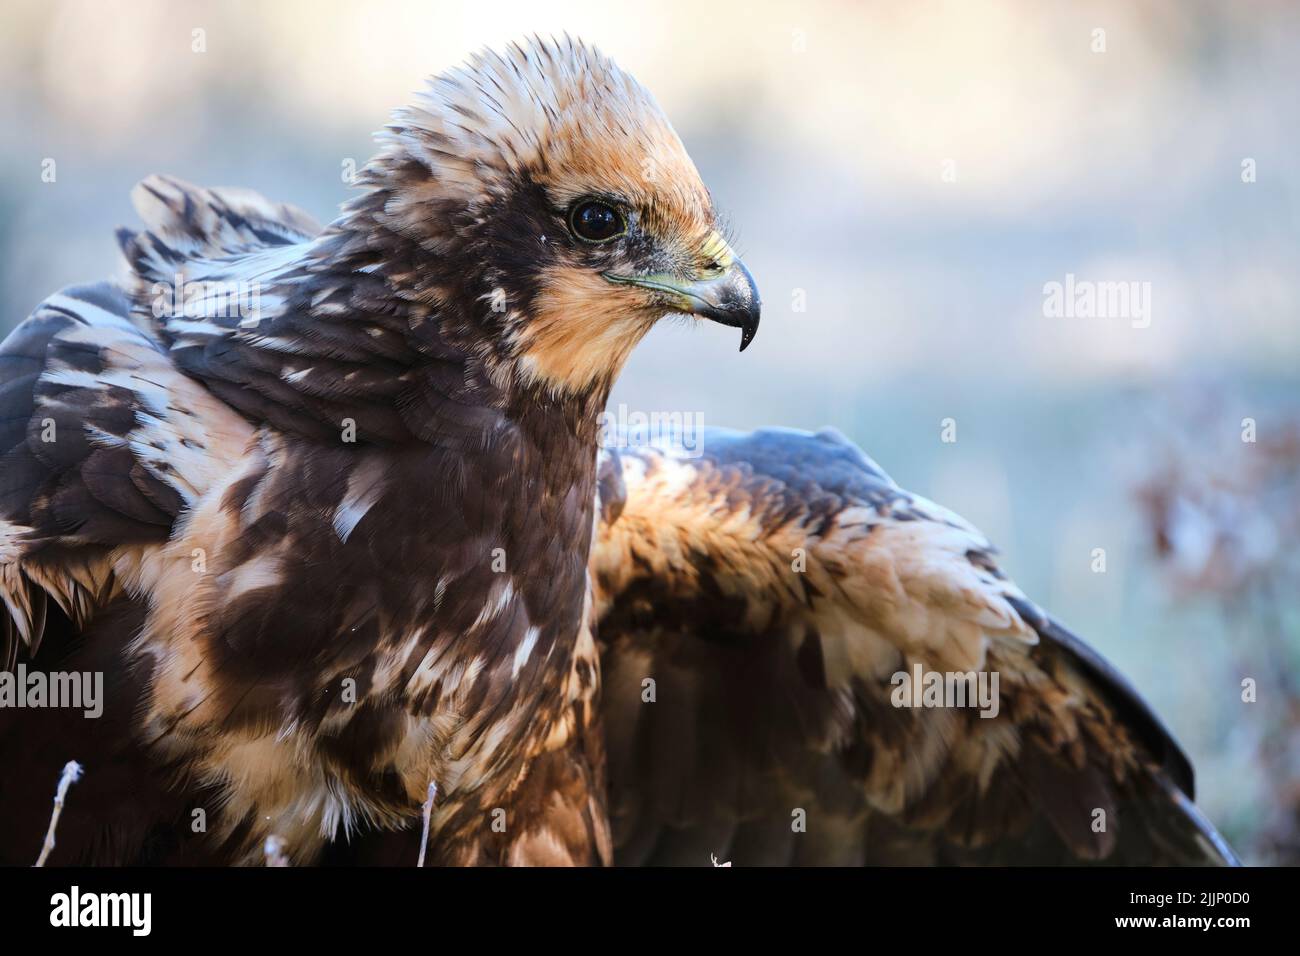 Close-up in landscape format of a female Marsh Harrier, Circus aeruginosus, perched on the ground against a blurred background with copy space. Lion. Stock Photo